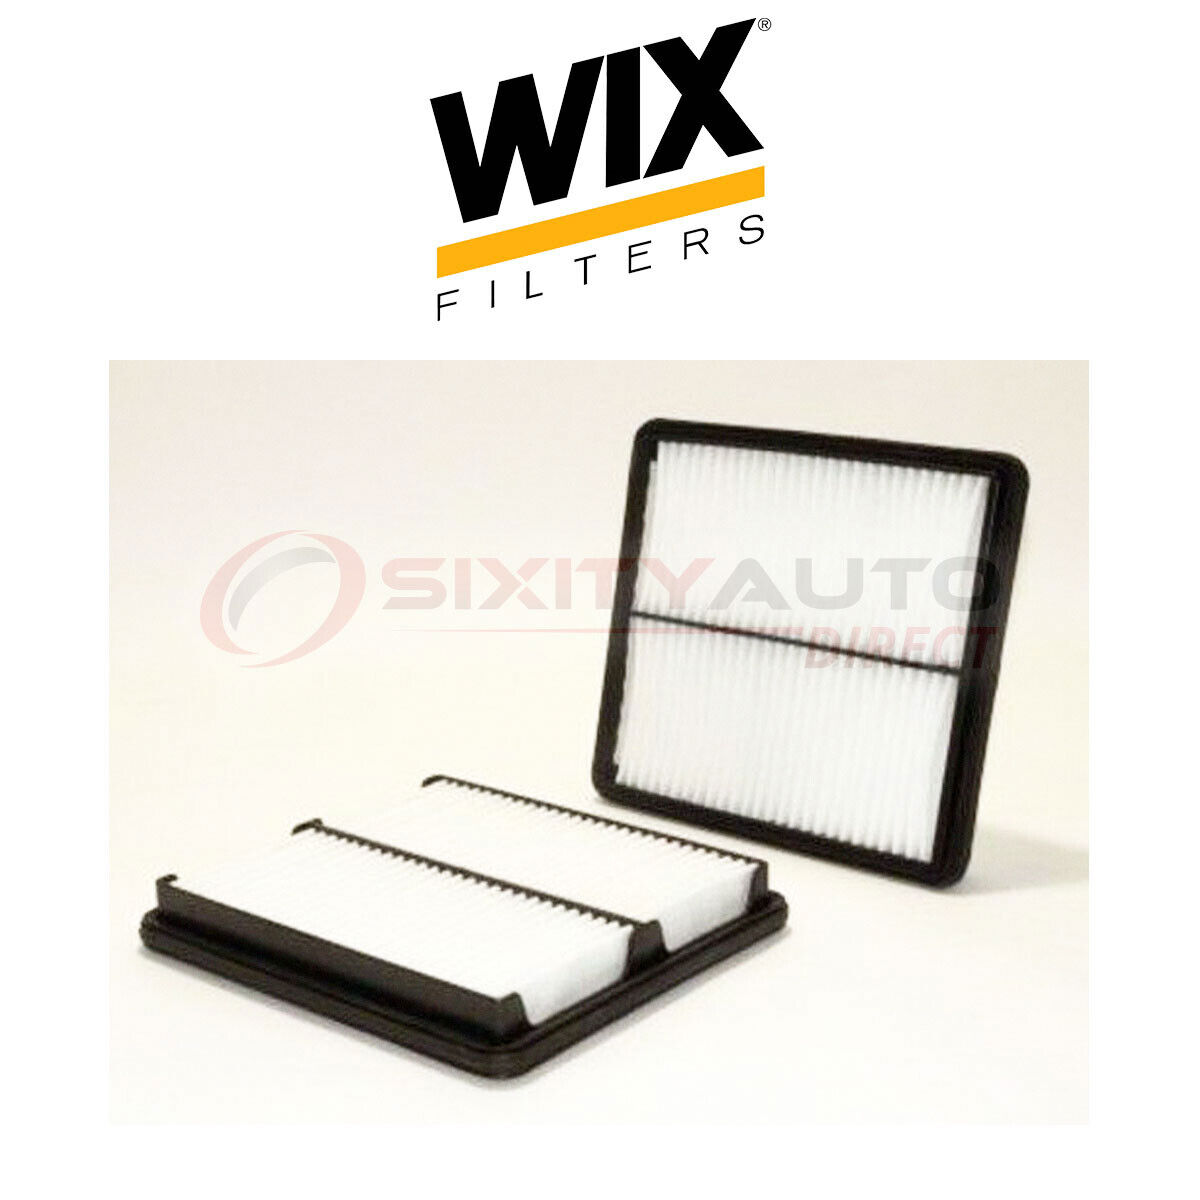 WIX Air Filter for 1999-2002 Daewoo Leganza 2.2L L4 - Filtration System gc